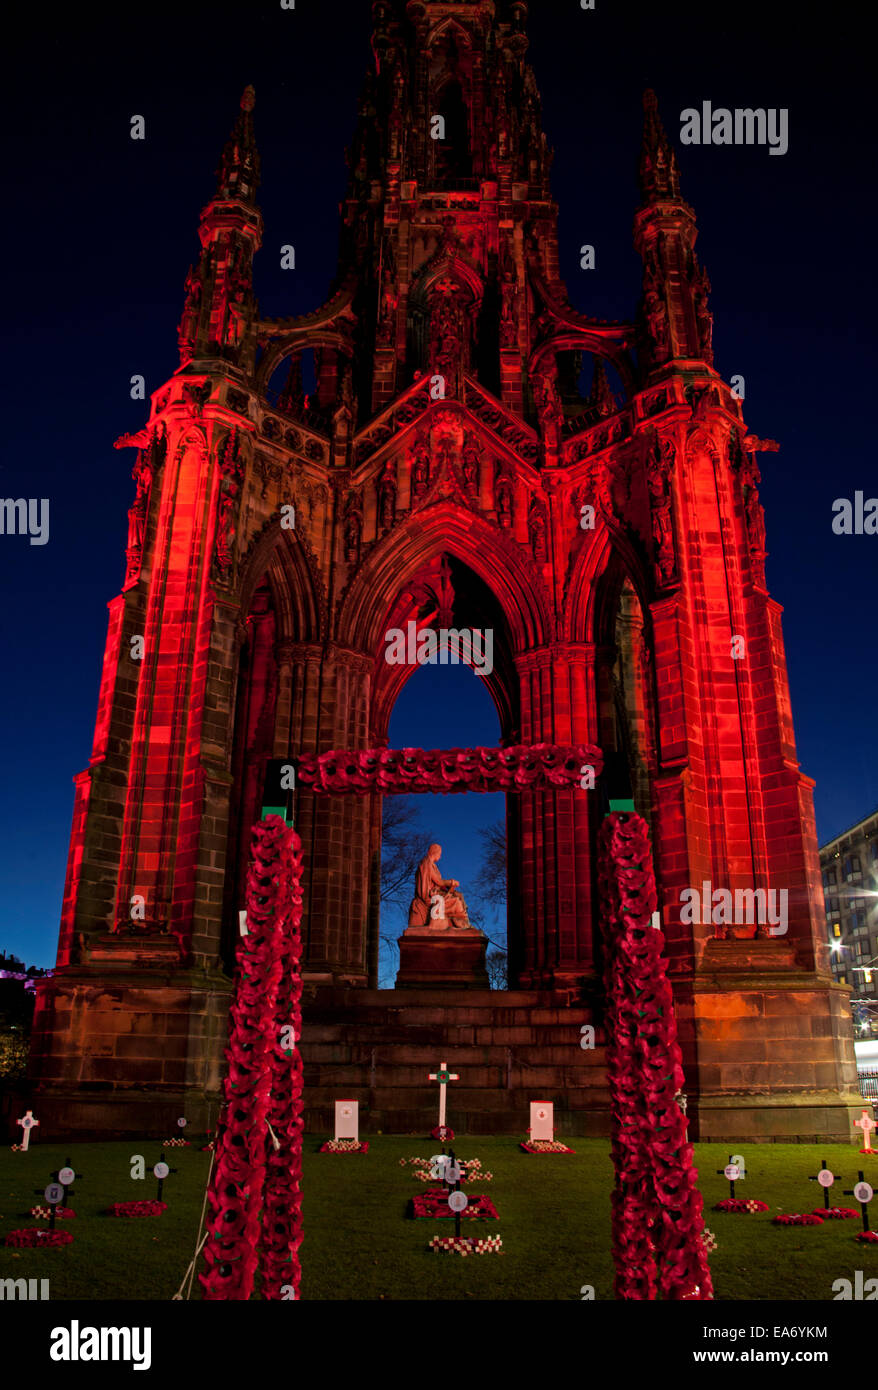 Edinburgh, Princes Street Gardens East, Scotland. 7th November 2014.The Walter Scott Monument has been illuminated in poppy red from tonight in tribute to the soldiers who gave their lives in the First World War. Several Remembrance events will be held throughout Edinburgh over the next few days to mark 100 years since the First World War. Stock Photo